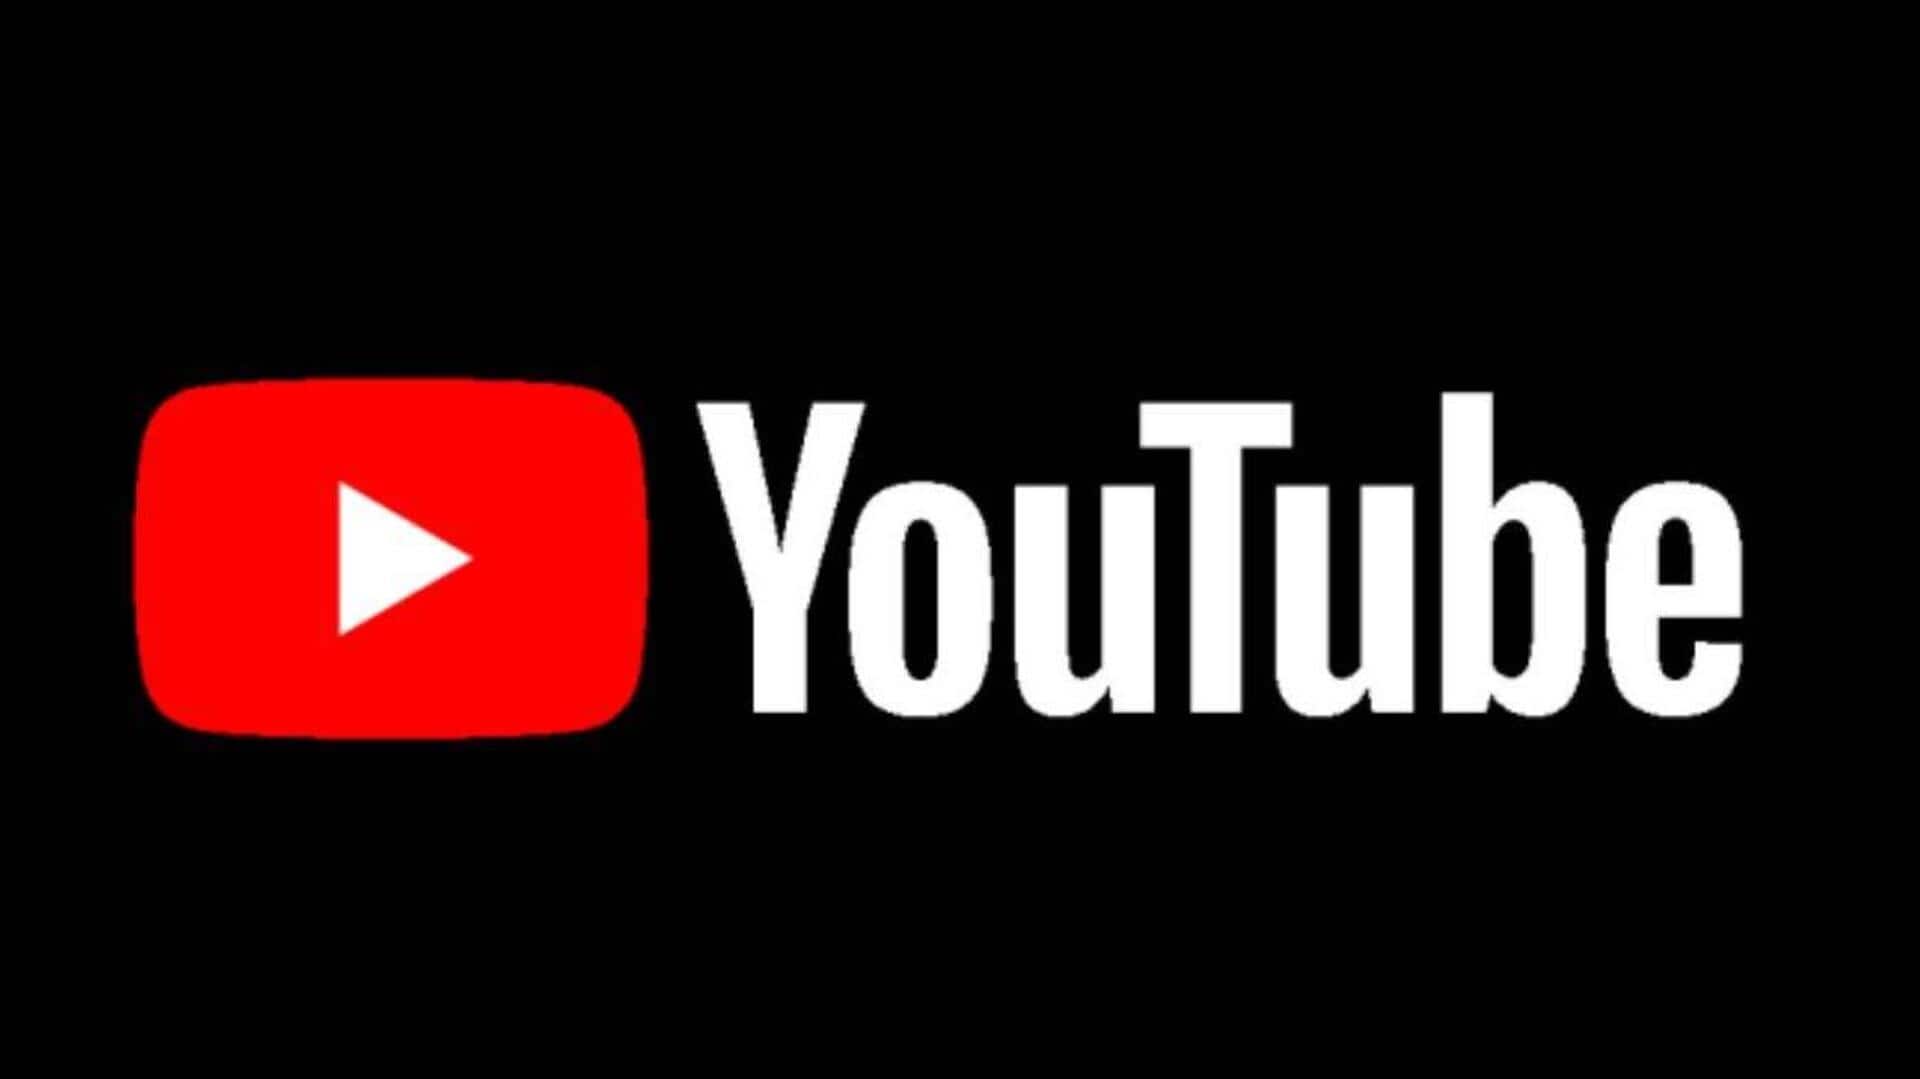 YouTube working on labels for 'realistic' AI-generated content